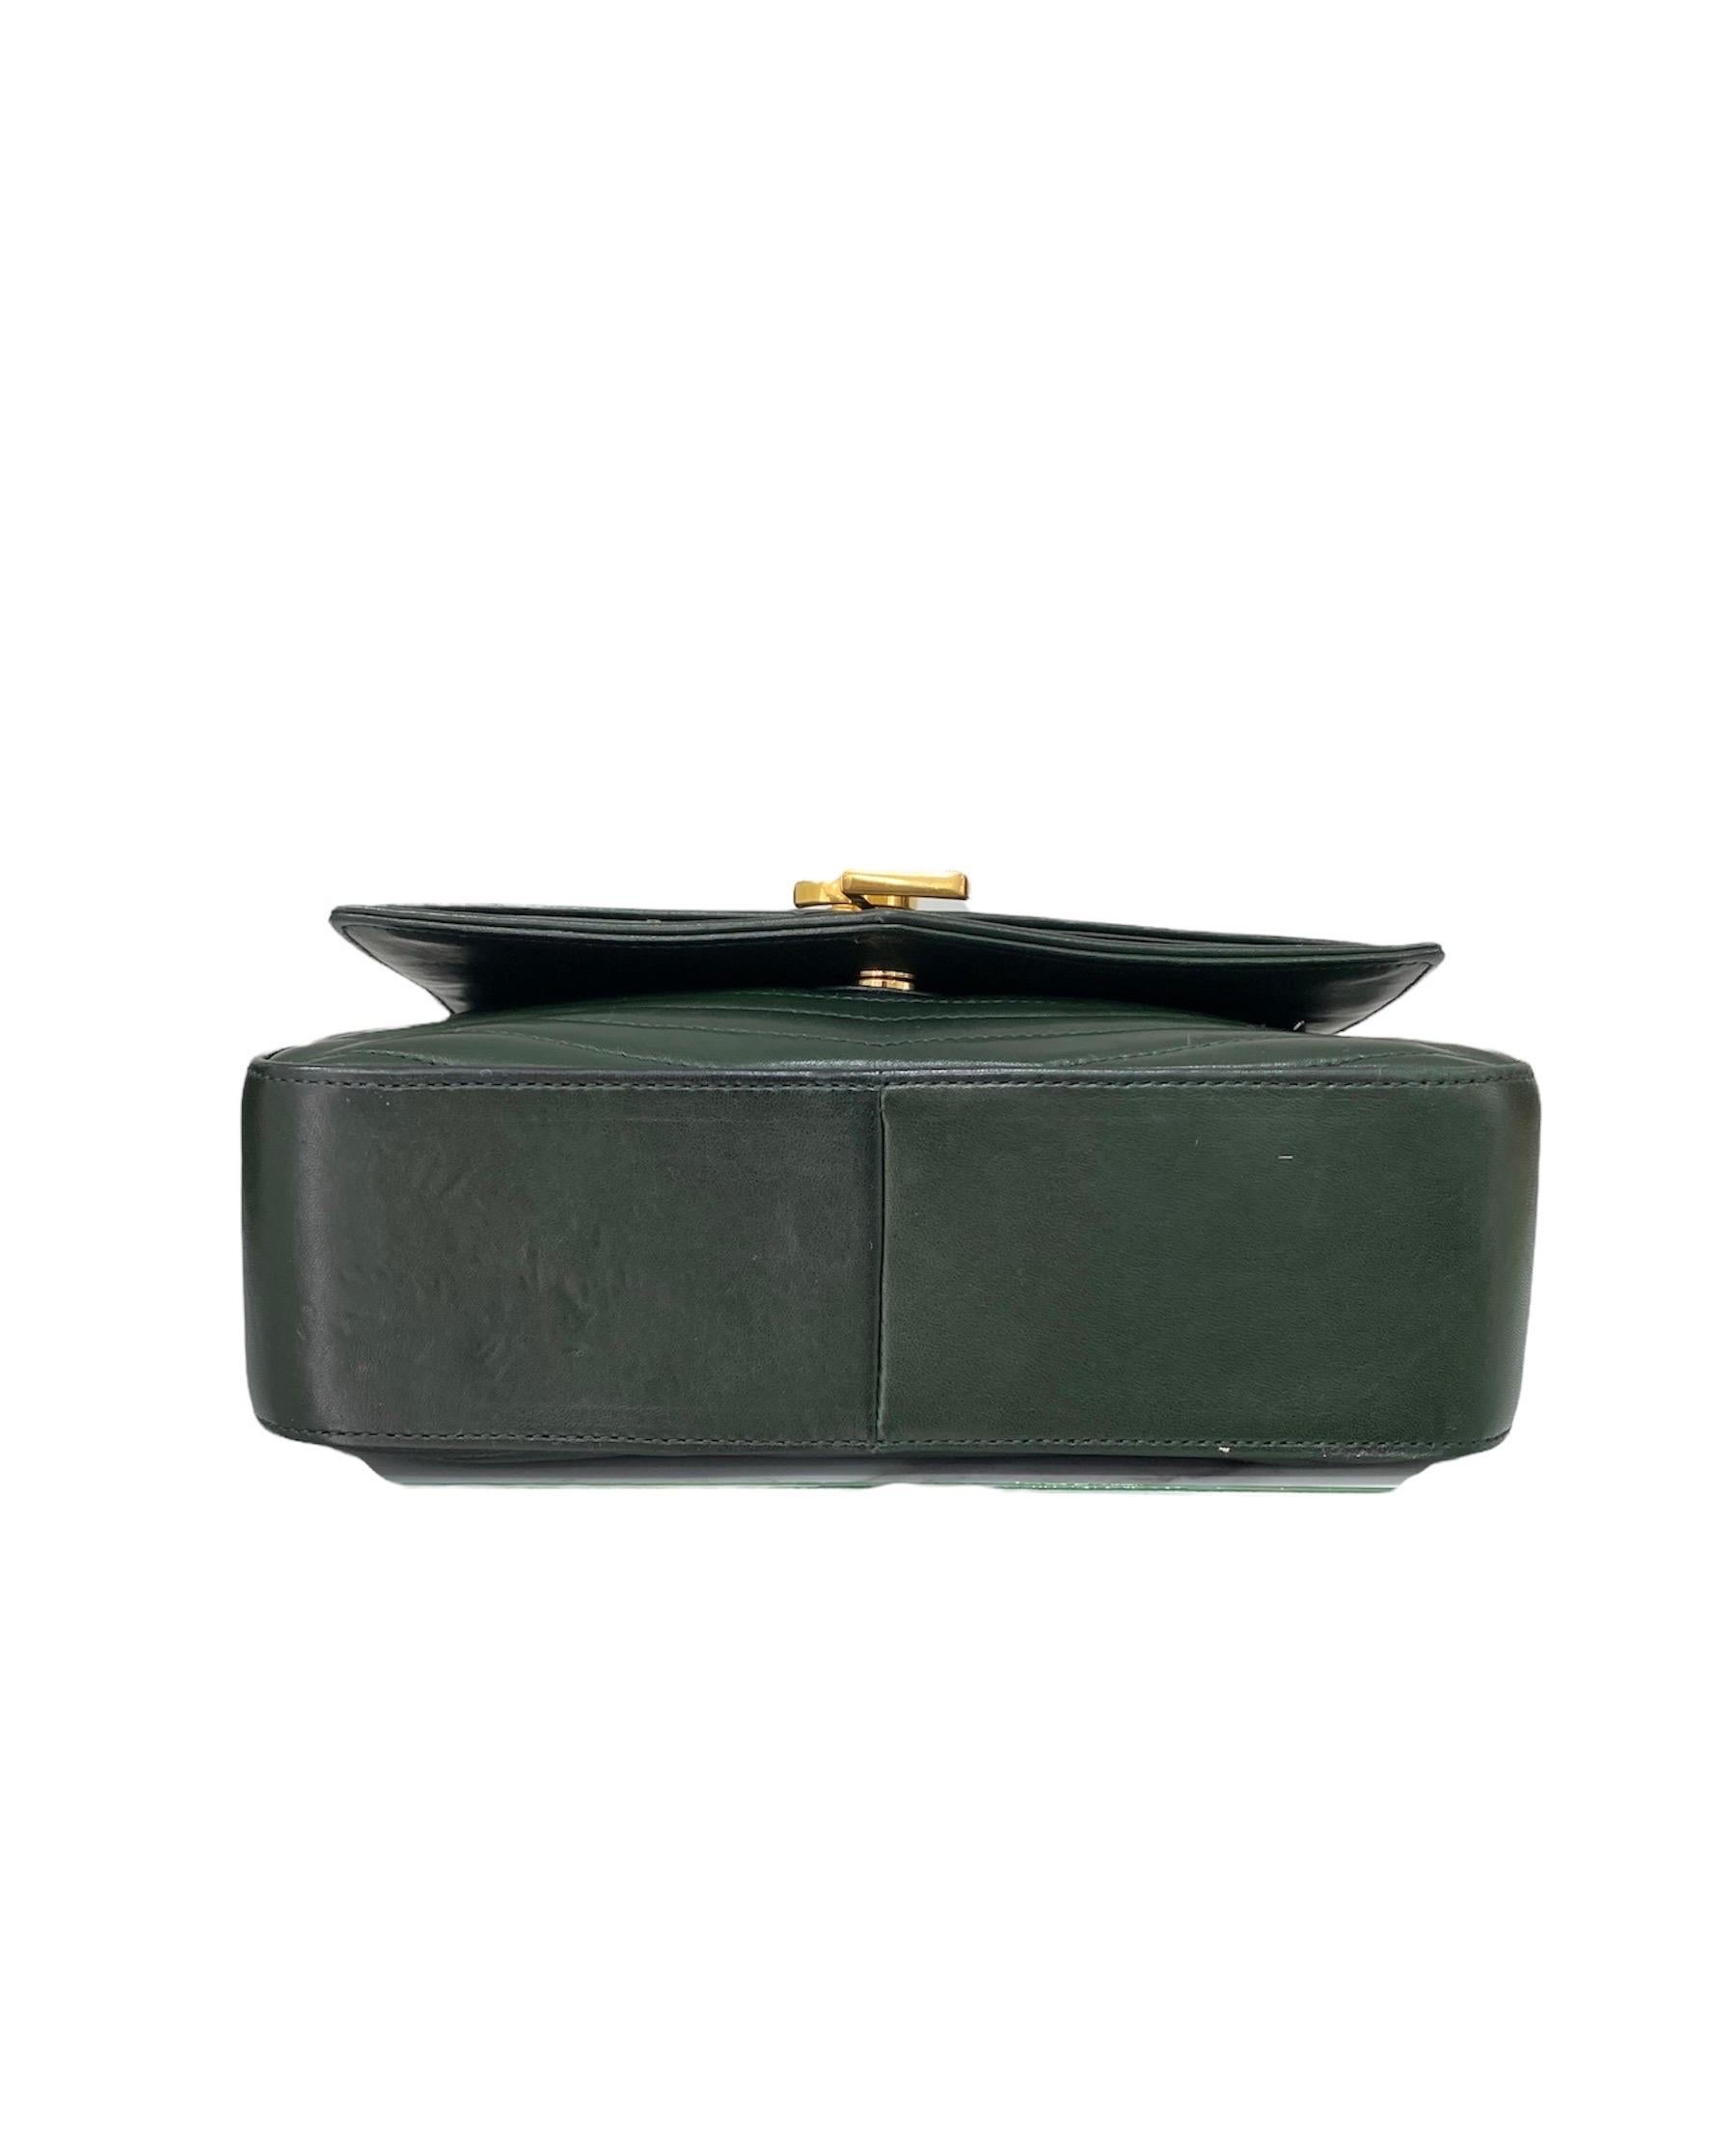 Saint Laurent bag, Sulpice model, made of bottle green leather, with golden hardware.
Equipped with a flap with double magnetic button closure, internally lined in black leather, quite roomy.
Equipped with a leather and chain shoulder strap and